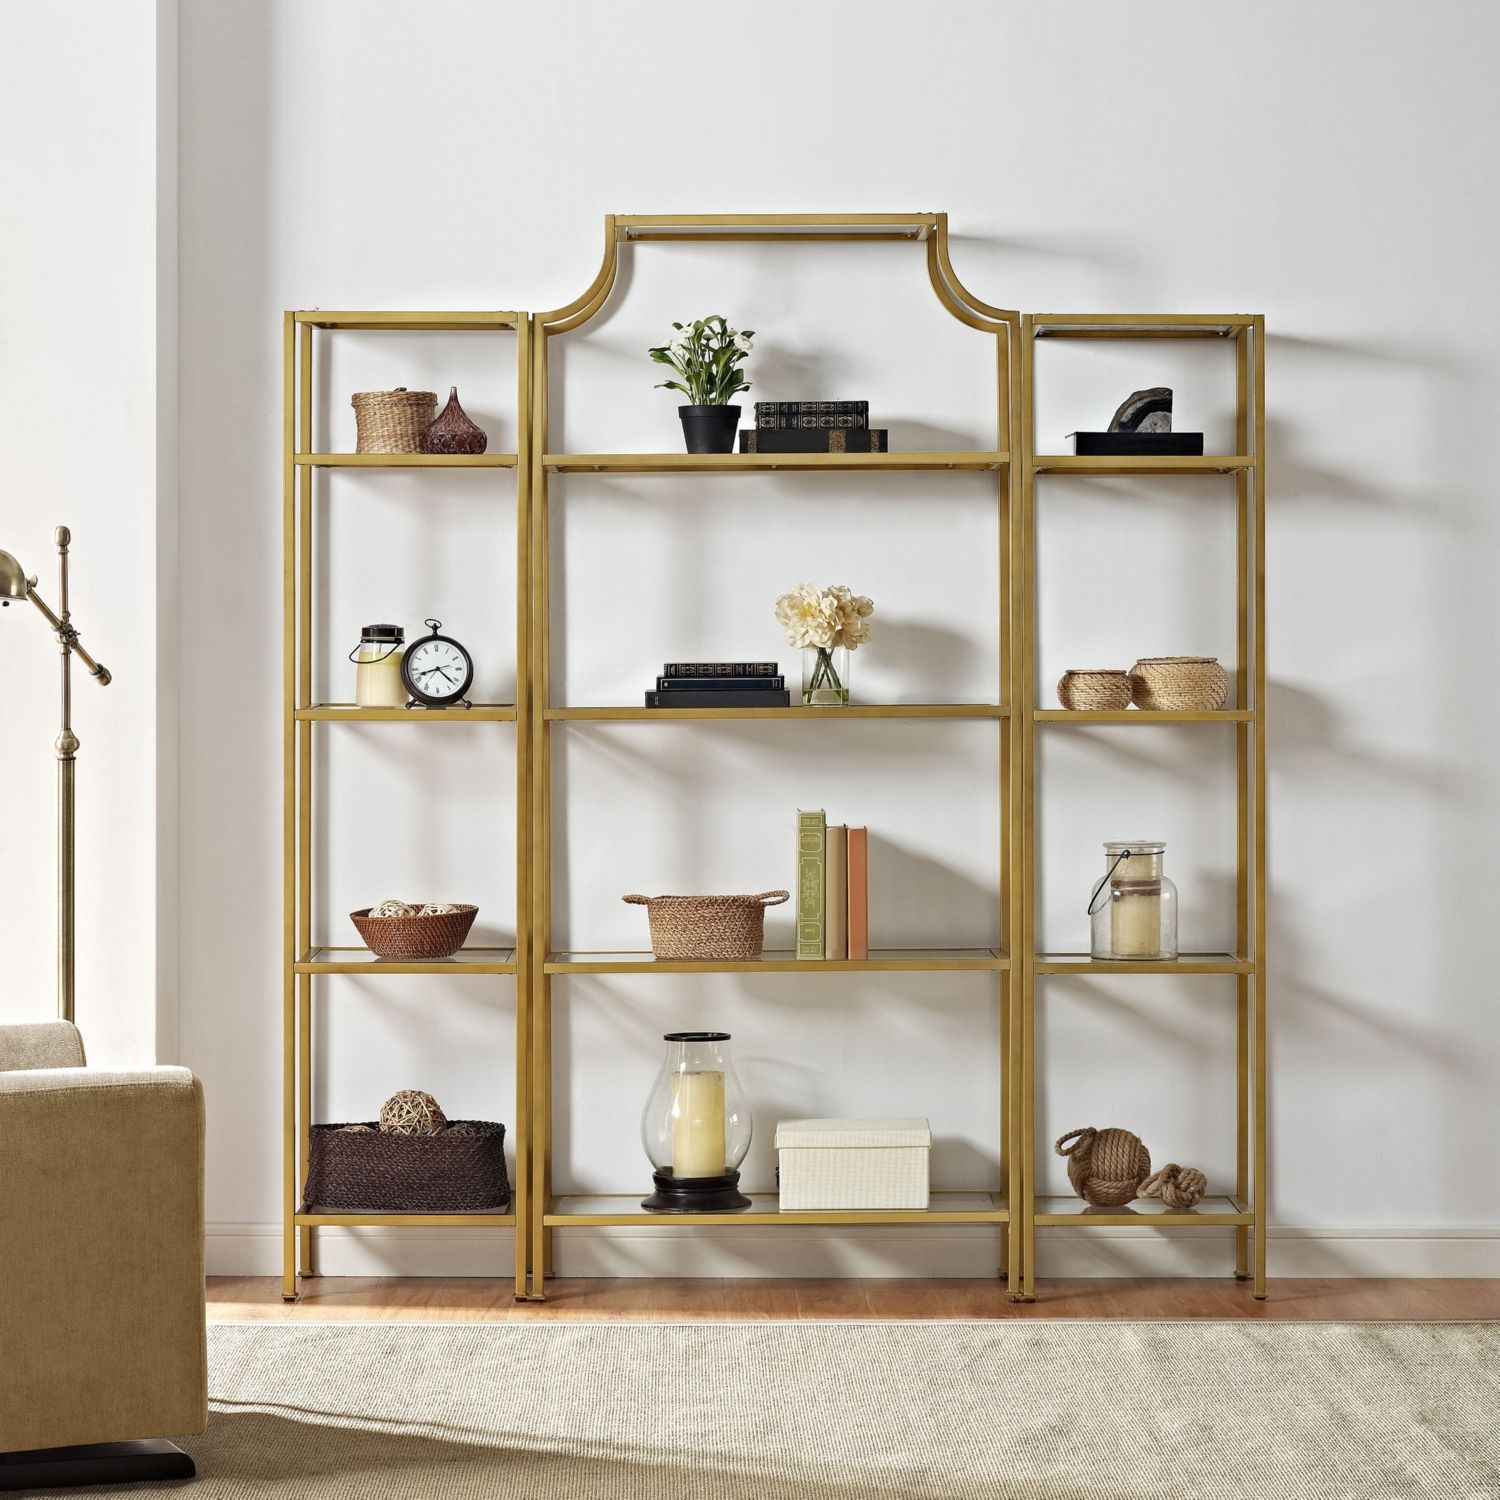 Crosley Kf65004gl Aimee 3 Piece Etagere Bookcase Set In Antique Gold Finish  & Tempered Glass Intended For Antique Gold Bookcases (View 11 of 15)